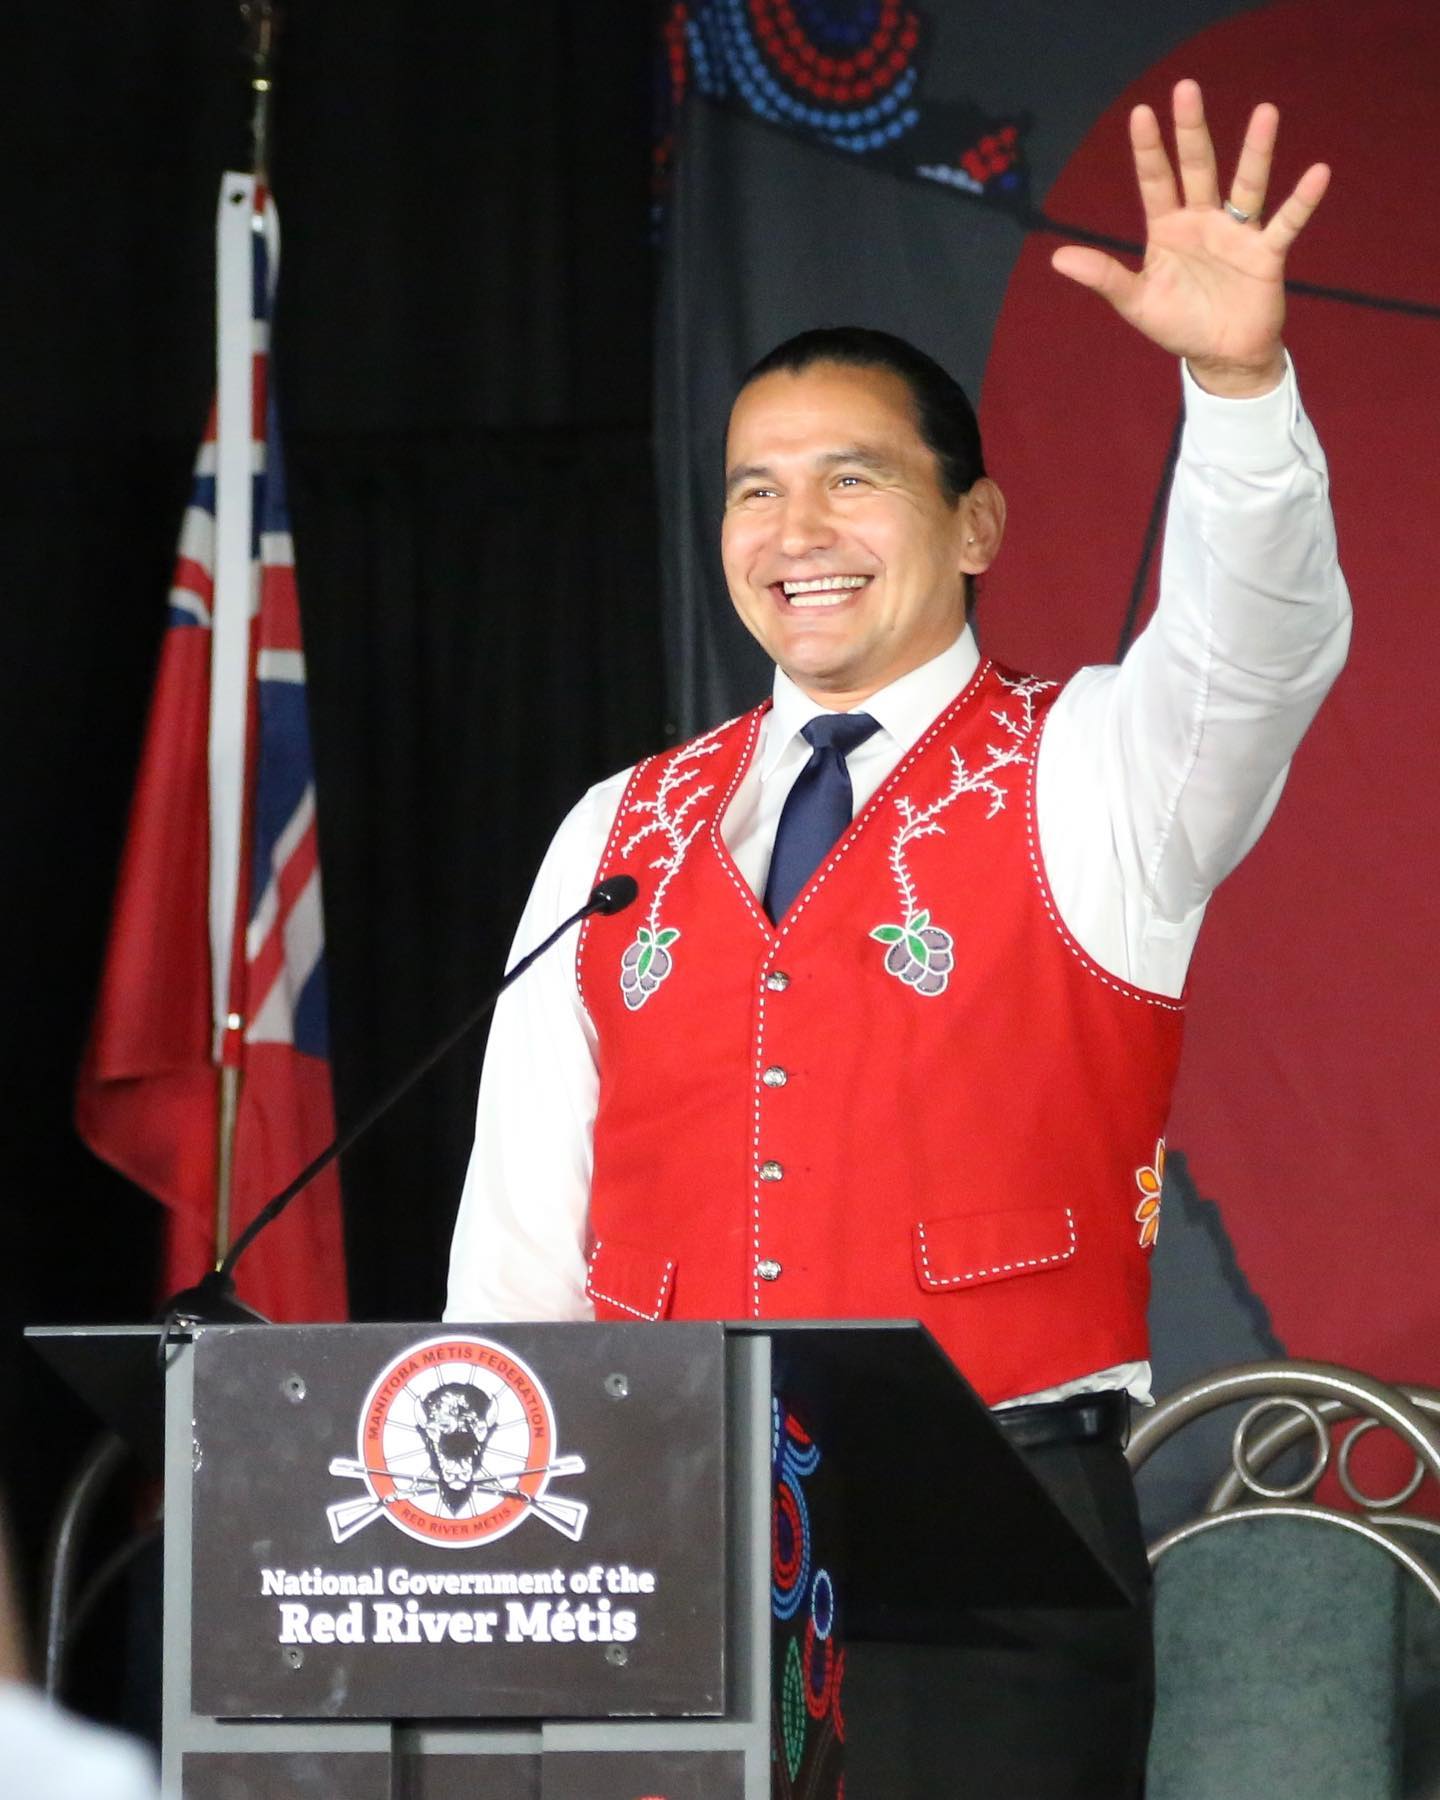 This Indigenous Journalist And Rapper Has Become Canada’s First First Nations Province Leader